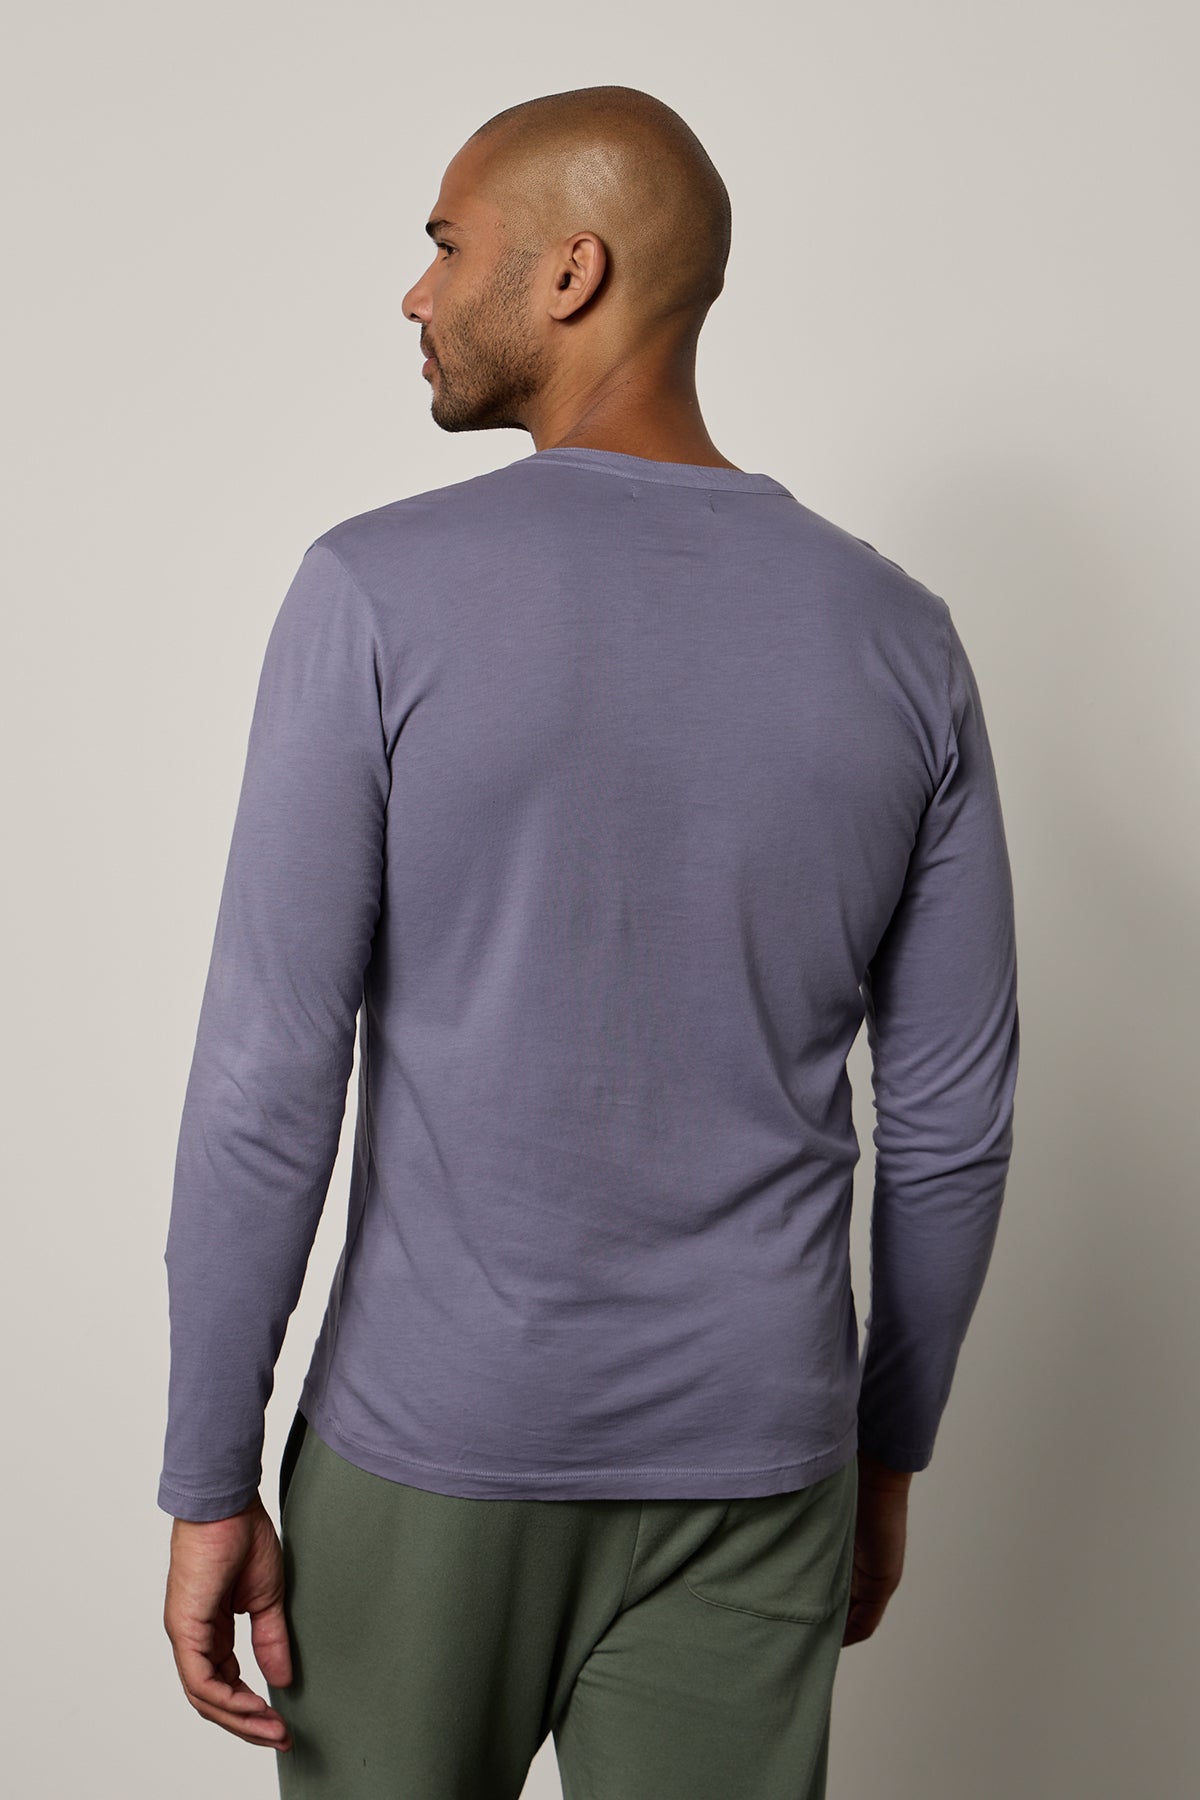 The back view of a man wearing an ALVARO COTTON JERSEY HENLEY t - shirt by Velvet by Graham & Spencer.-26629718180033